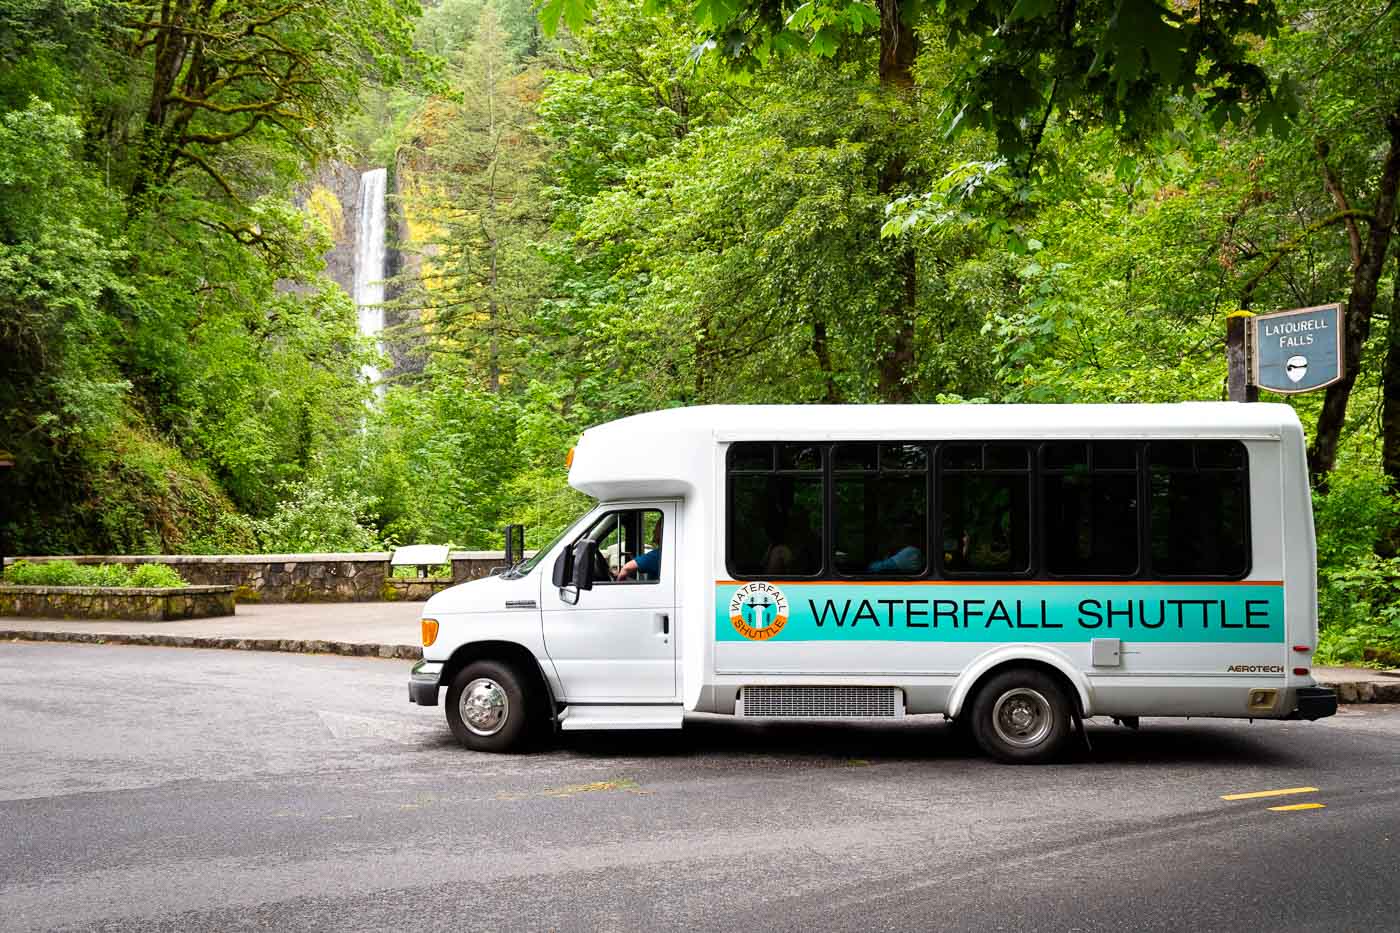 Waterfall shuttle bus with waterfall behind it.